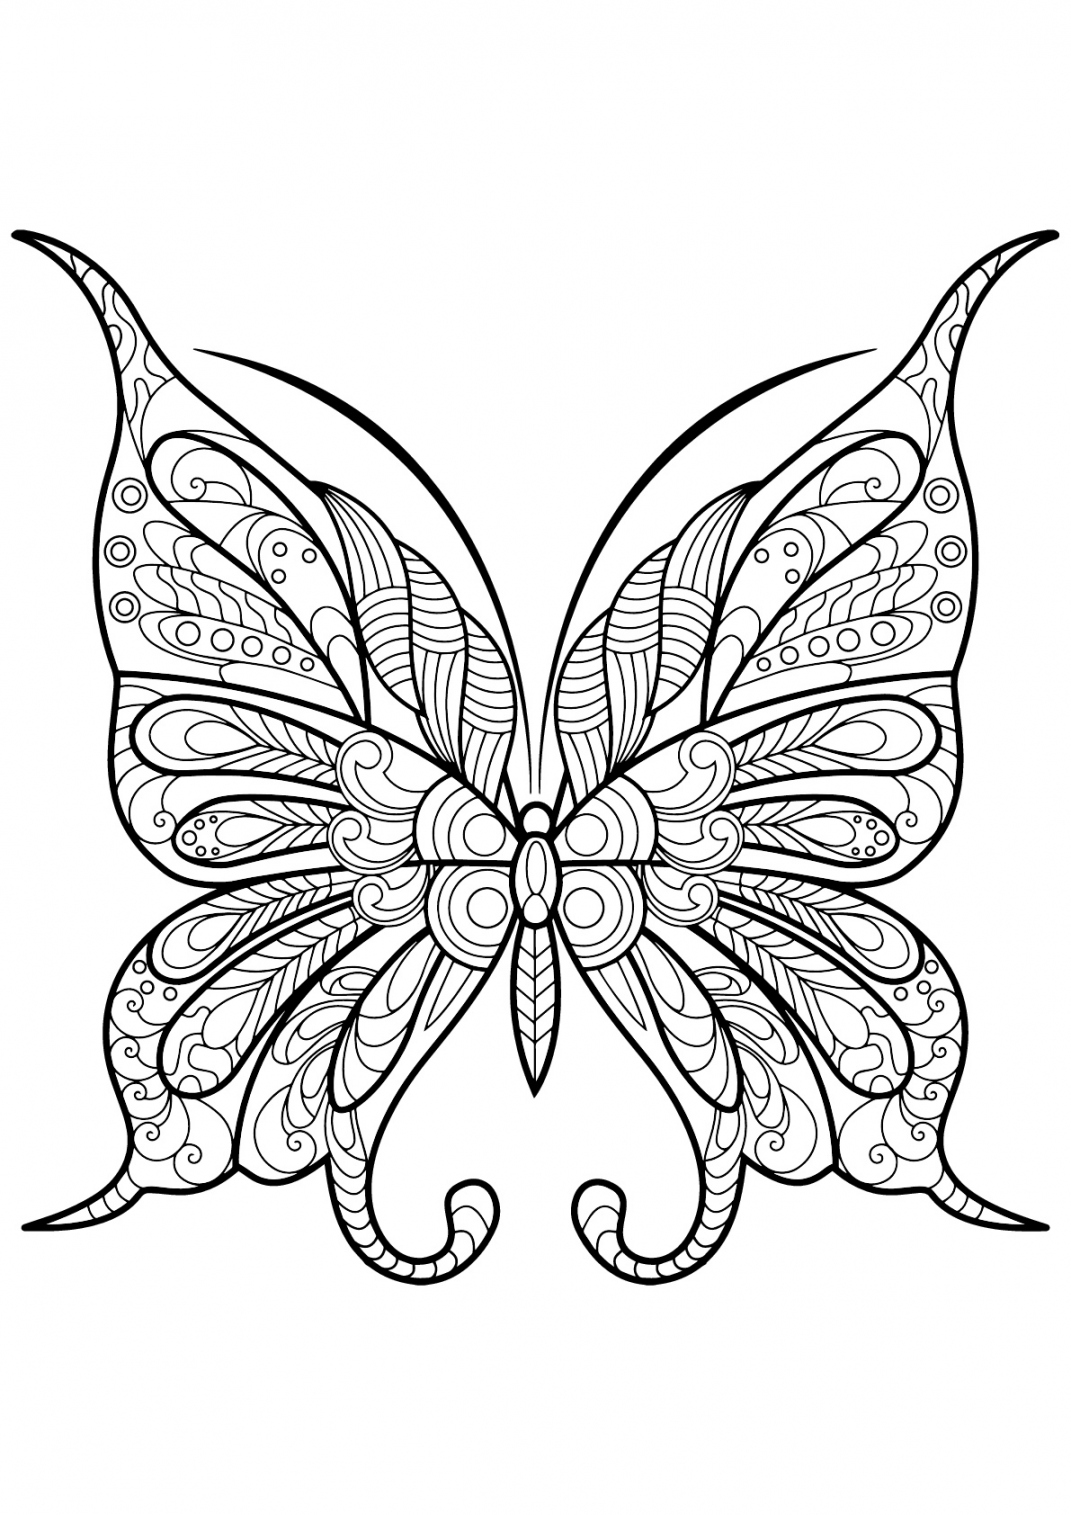 Butterfly Free Printable Coloring Pages - Printable - Free printable butterfly coloring pages - Butterflies Kids